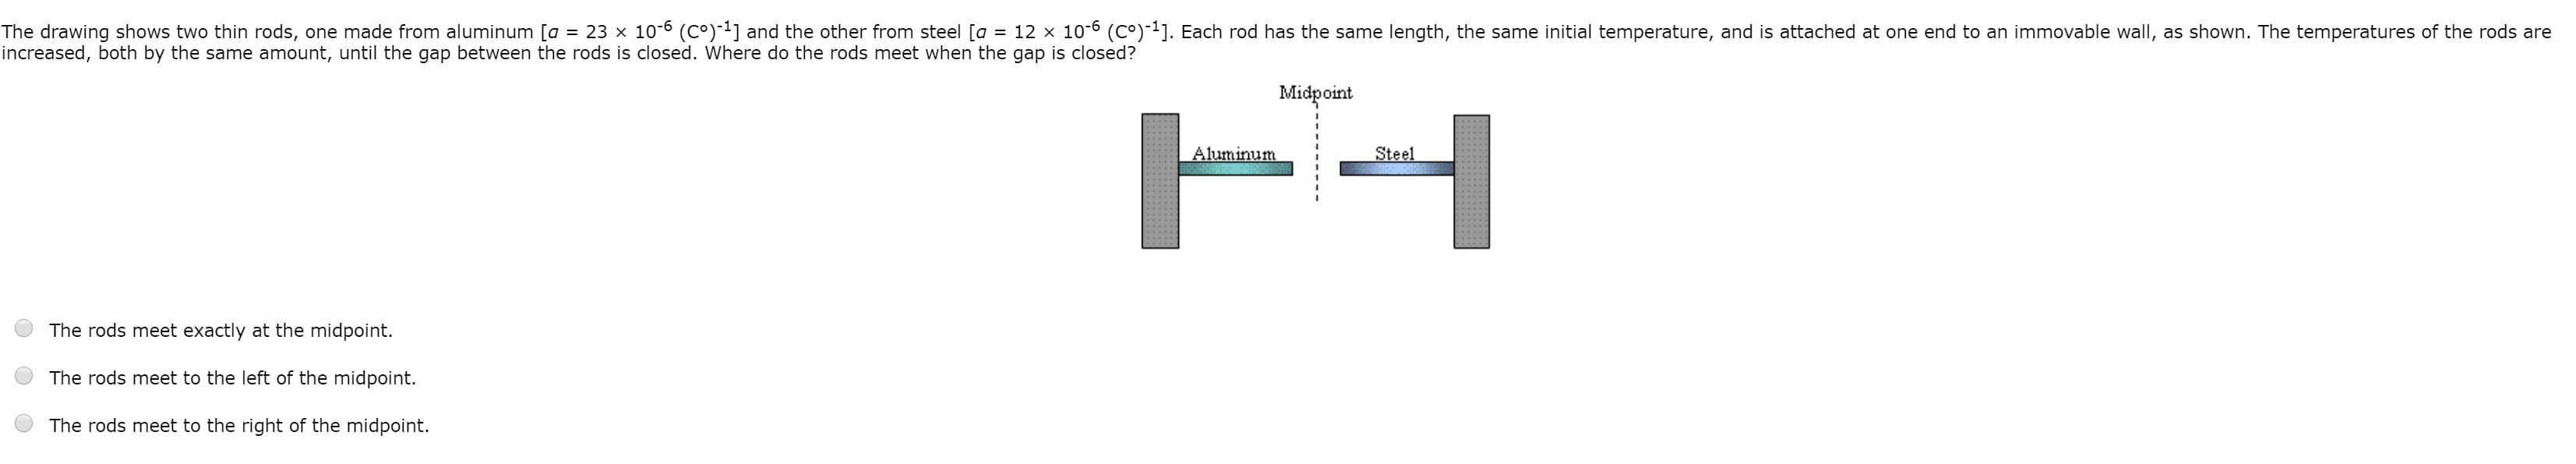 The drawing shows two thin rods, one made from aluminum [a = 23 x 10-6 (C°)-1] and the other from steel [a = 12 x 10-6 (C°)-1]. Each rod has the same length, the same initial temperature, and is attached at one end to an immovable wall, as shown. The temperatures of the rods
increased, both by the same amount, until the gap between the rods is closed. Where do the rods meet when the gap is closed?
